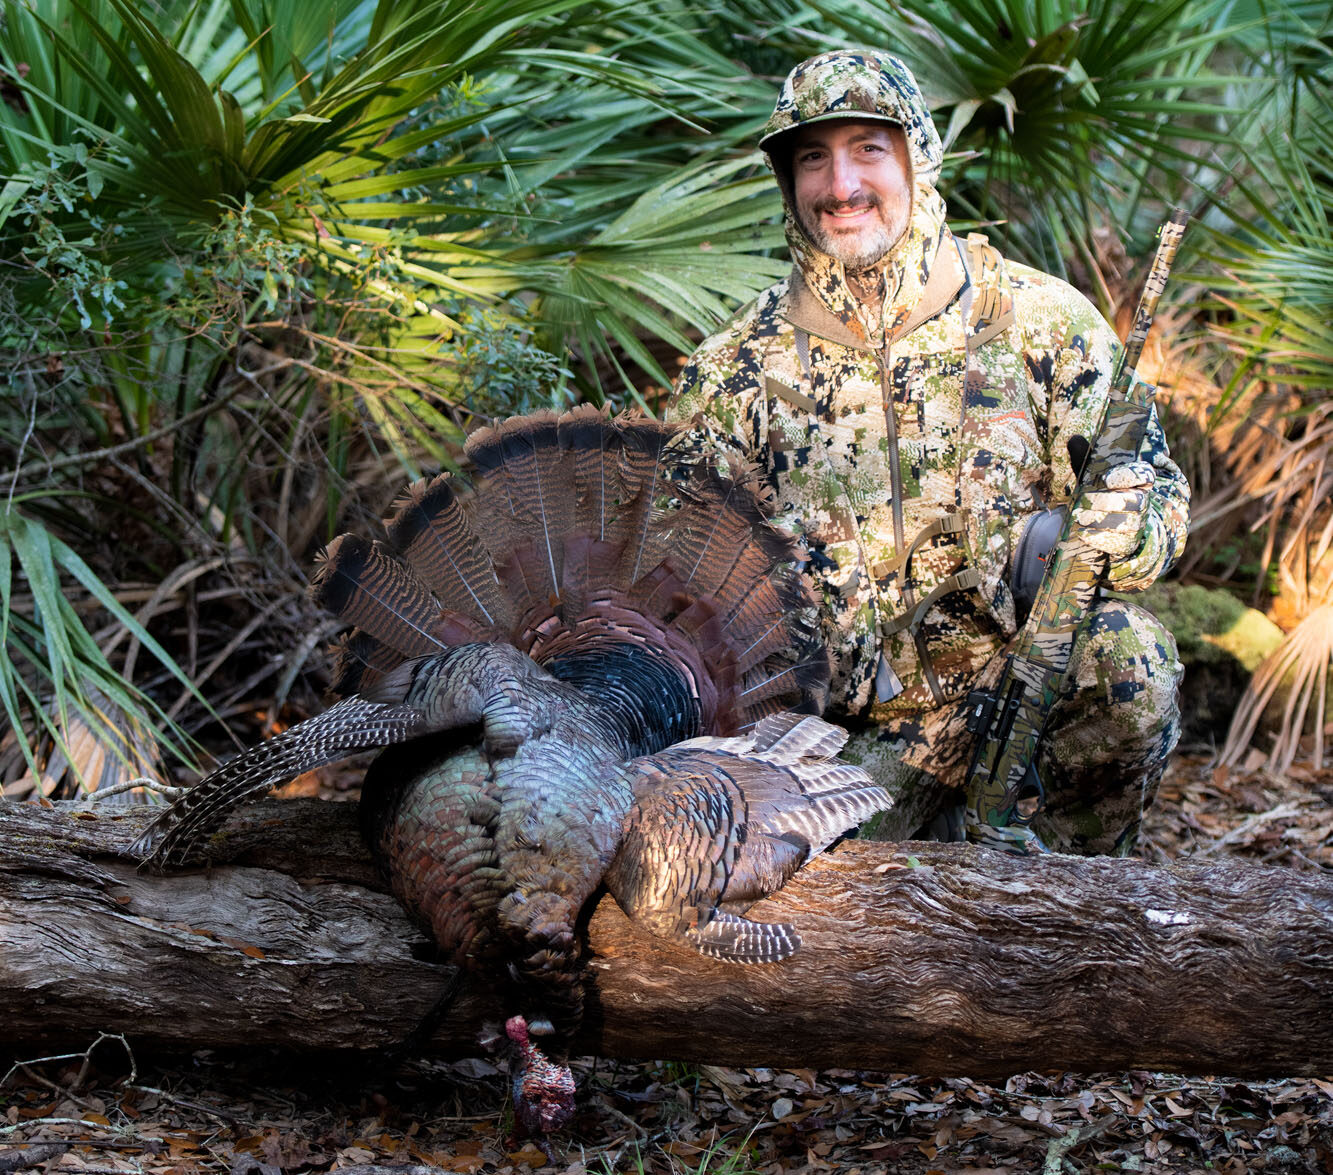 The author completed his North American turkey slam with this beautiful Osceola turkey.